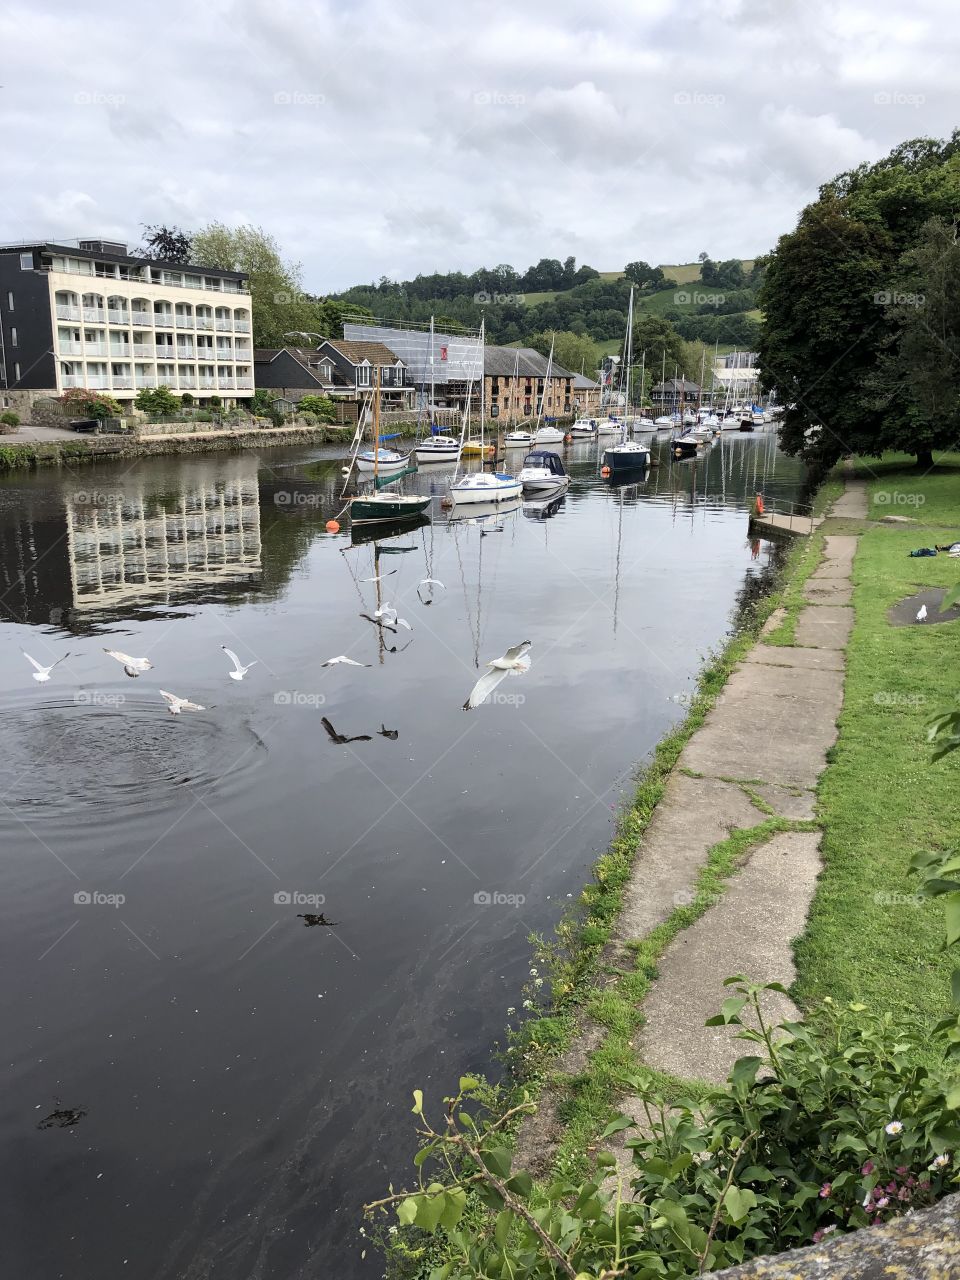 The sudden arrival of seagull on this river add to the beauty here in Totnes, Devon.